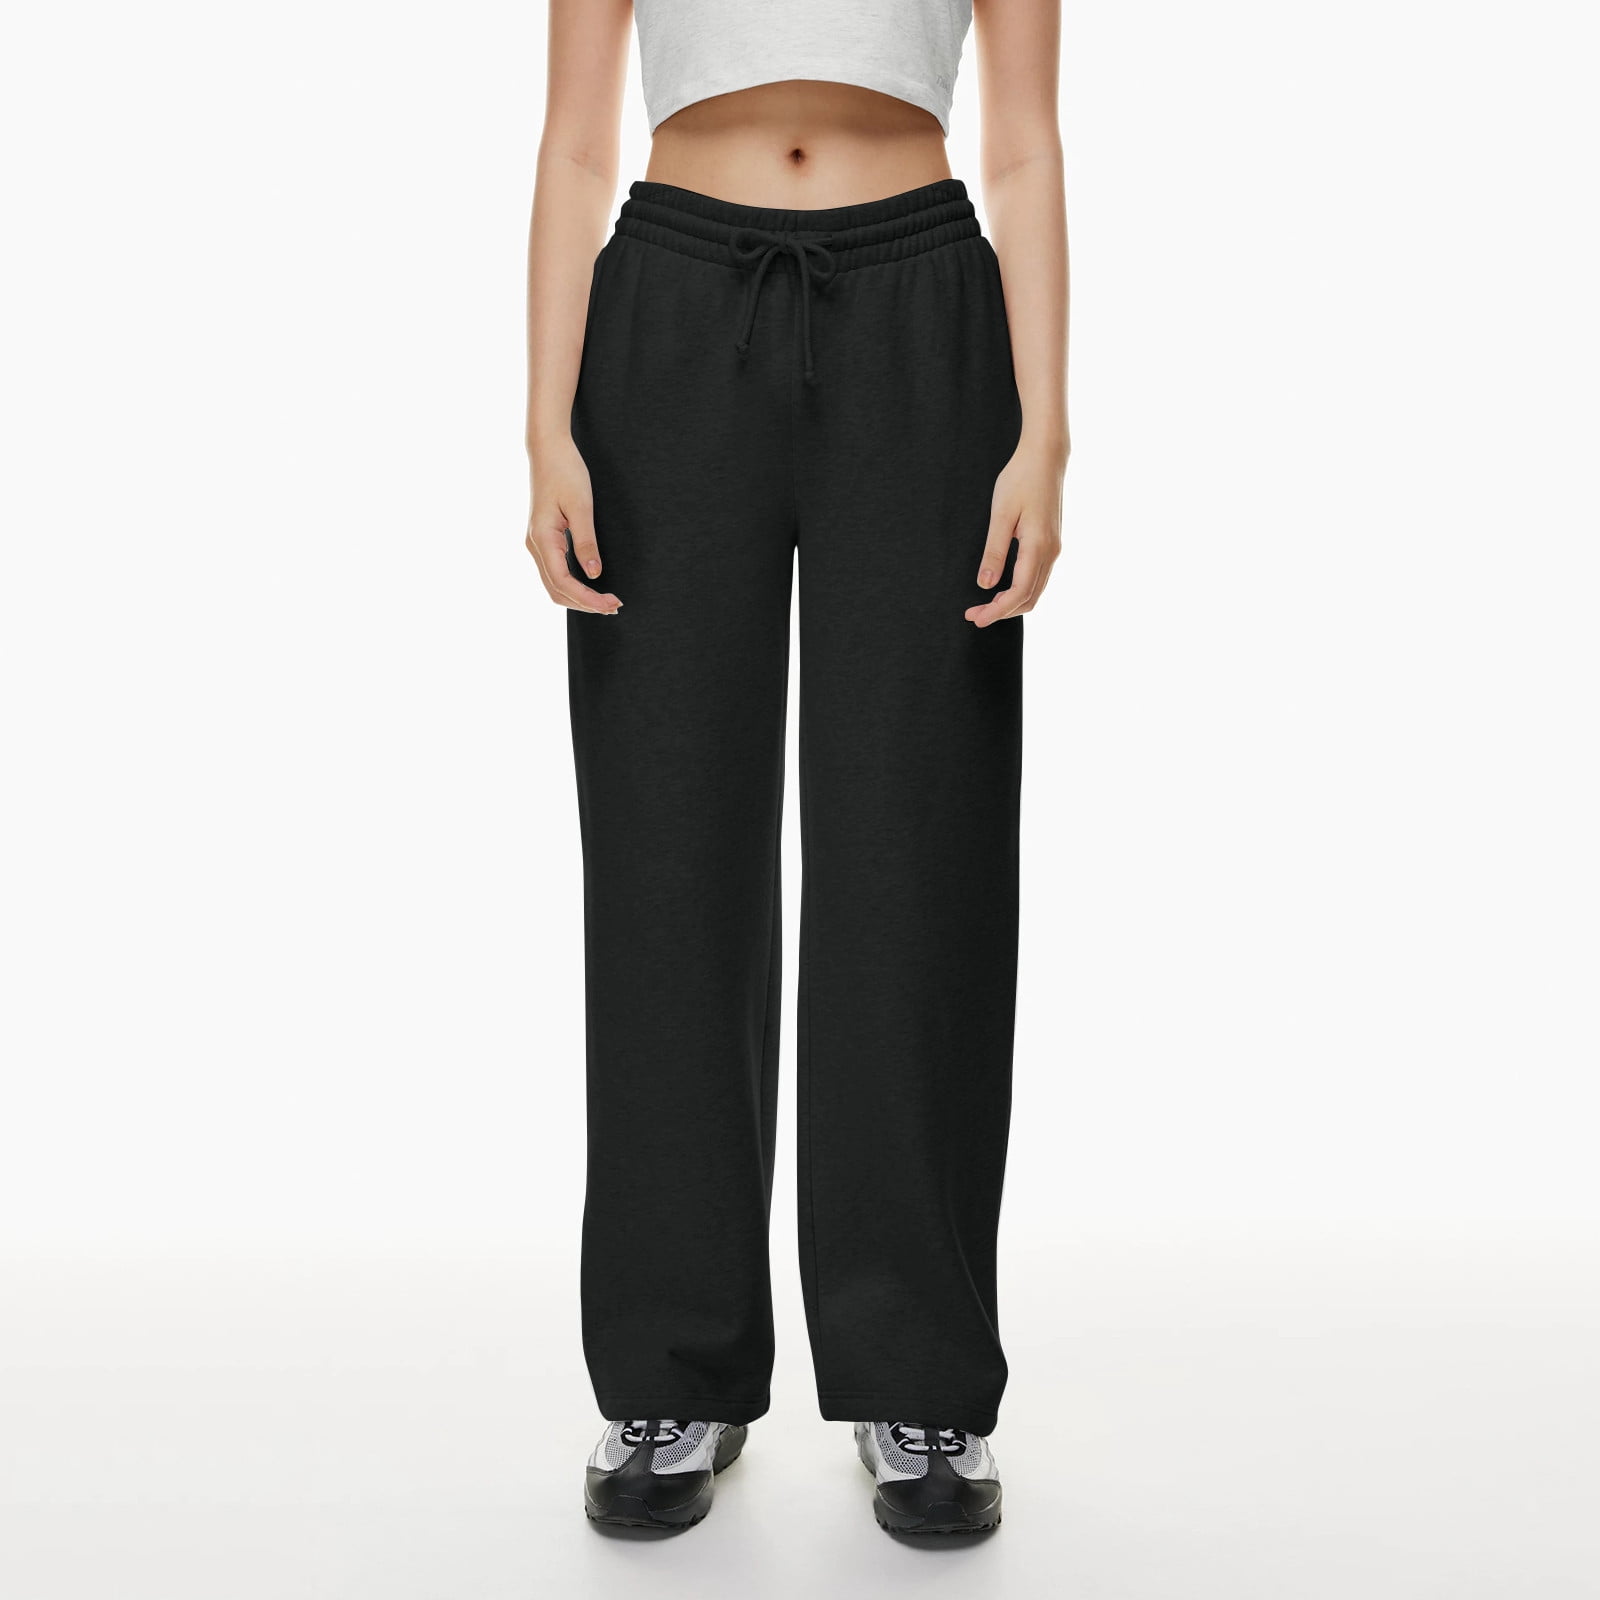 Susanny Sweatpants for Teen Girls with Pockets Petite Baggy High